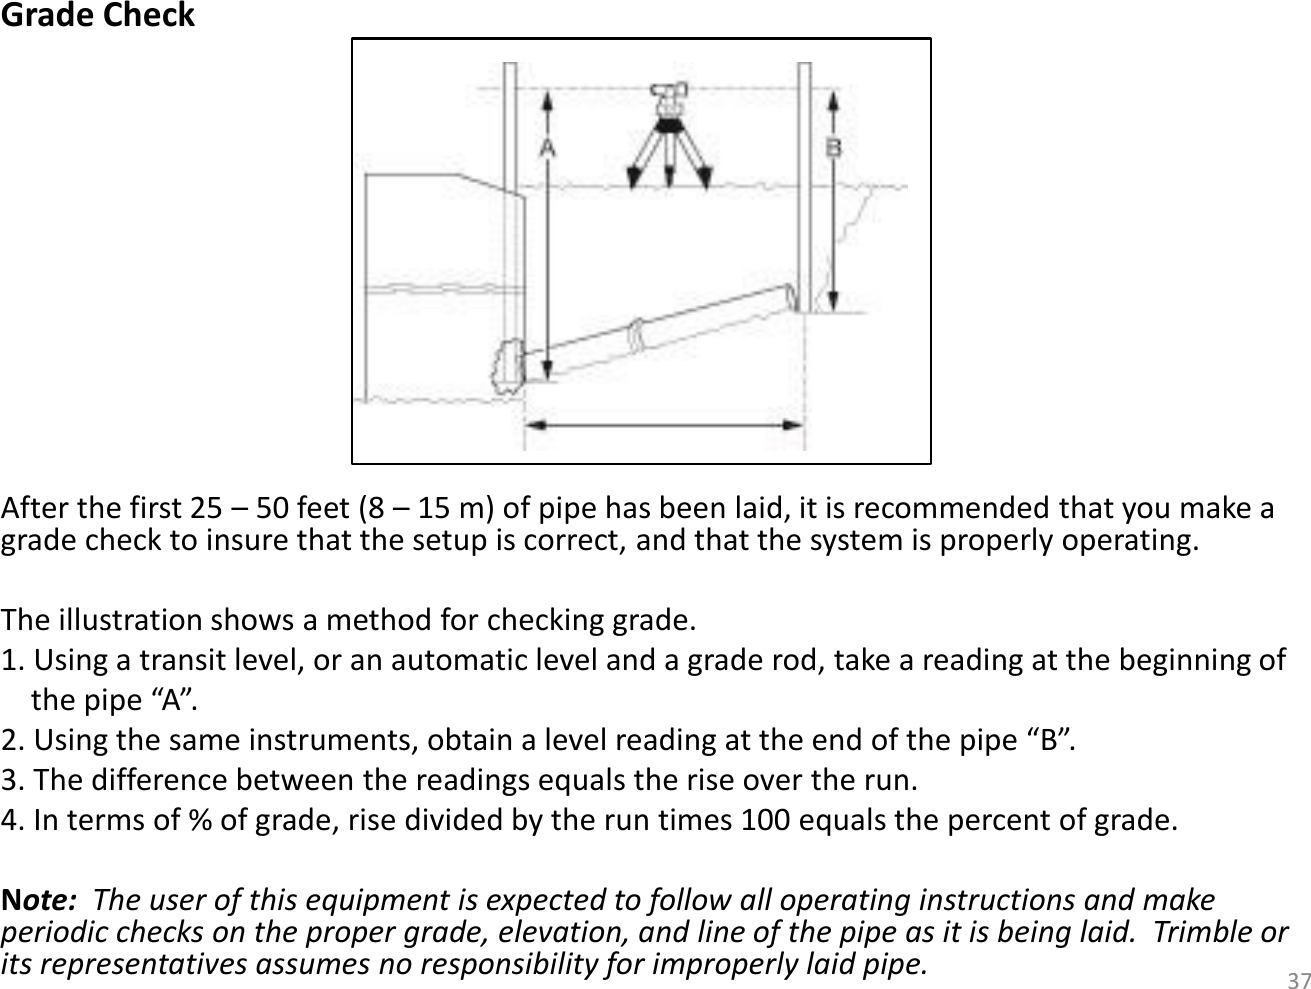 Grade Check             After the first 25 – 50 feet (8 – 15 m) of pipe has been laid, it is recommended that you make a grade check to insure that the setup is correct, and that the system is properly operating.  The illustration shows a method for checking grade. 1. Using a transit level, or an automatic level and a grade rod, take a reading at the beginning of      the pipe “A”. 2. Using the same instruments, obtain a level reading at the end of the pipe “B”. 3. The difference between the readings equals the rise over the run.  4. In terms of % of grade, rise divided by the run times 100 equals the percent of grade.  Note:  The user of this equipment is expected to follow all operating instructions and make periodic checks on the proper grade, elevation, and line of the pipe as it is being laid.  Trimble or its representatives assumes no responsibility for improperly laid pipe.  37 